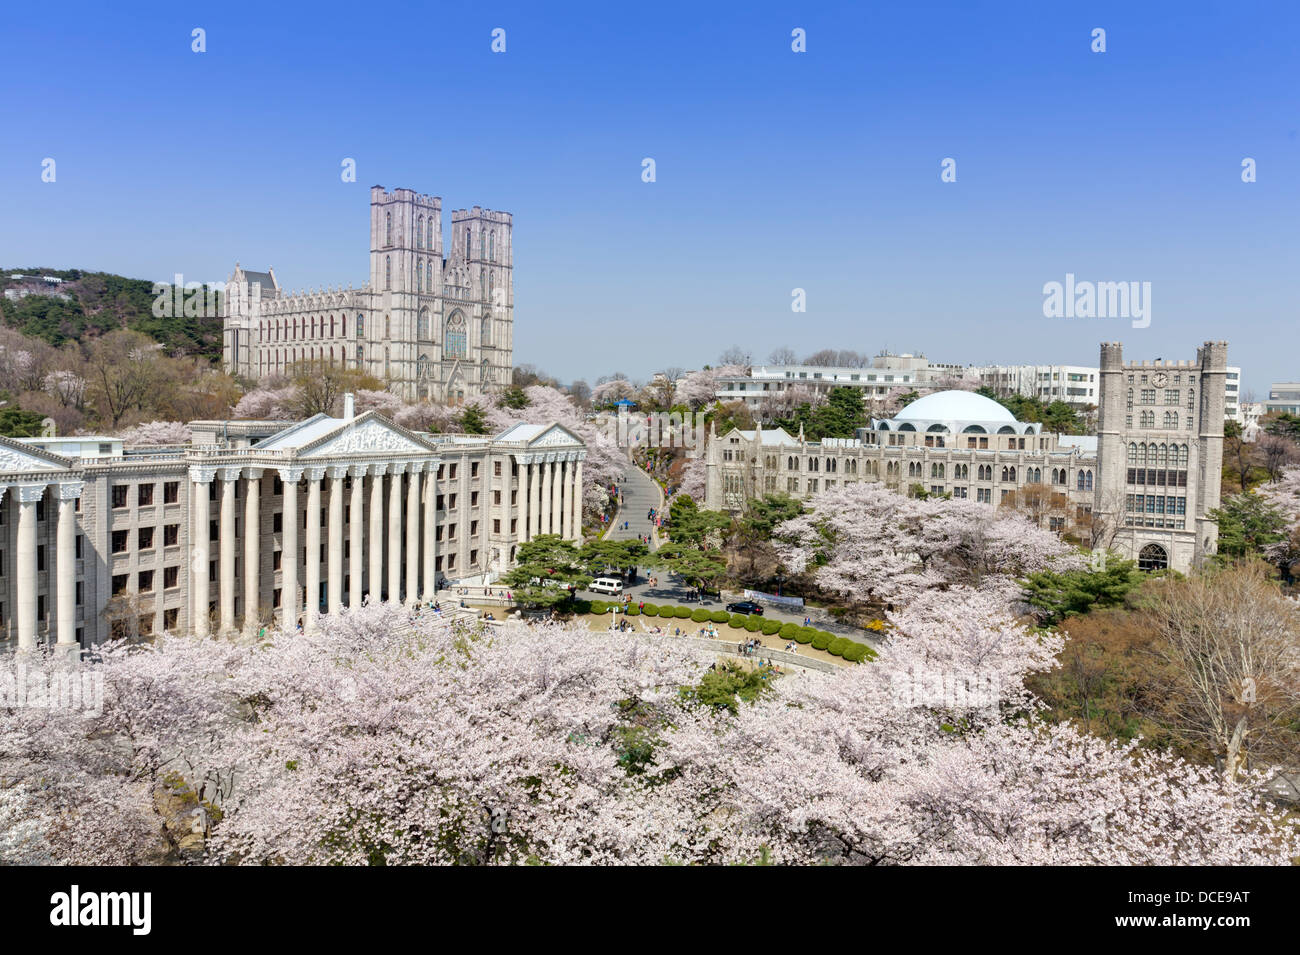 Kyung Hee University is a one of the most famous university in Korea. It is comprehensive and private. Stock Photo